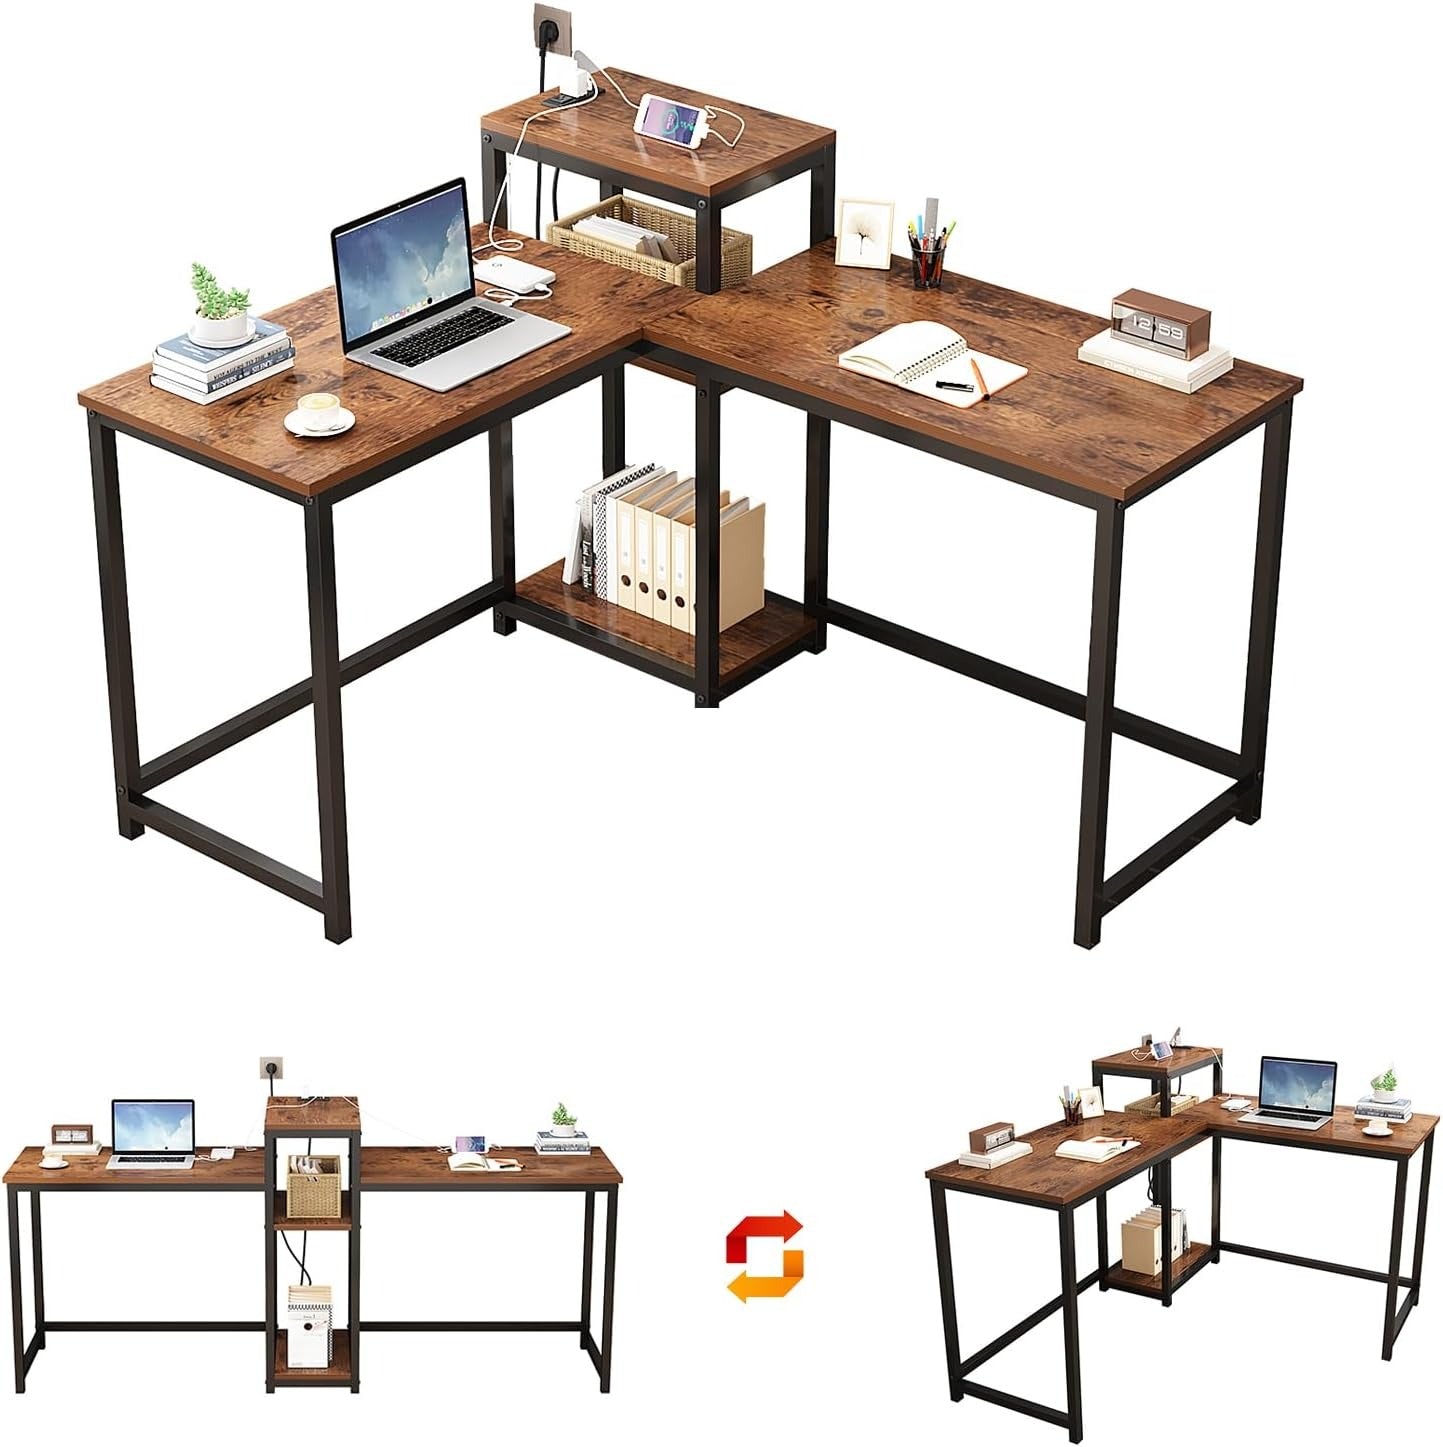 83 Inches Two Person Desk wooden rustic style